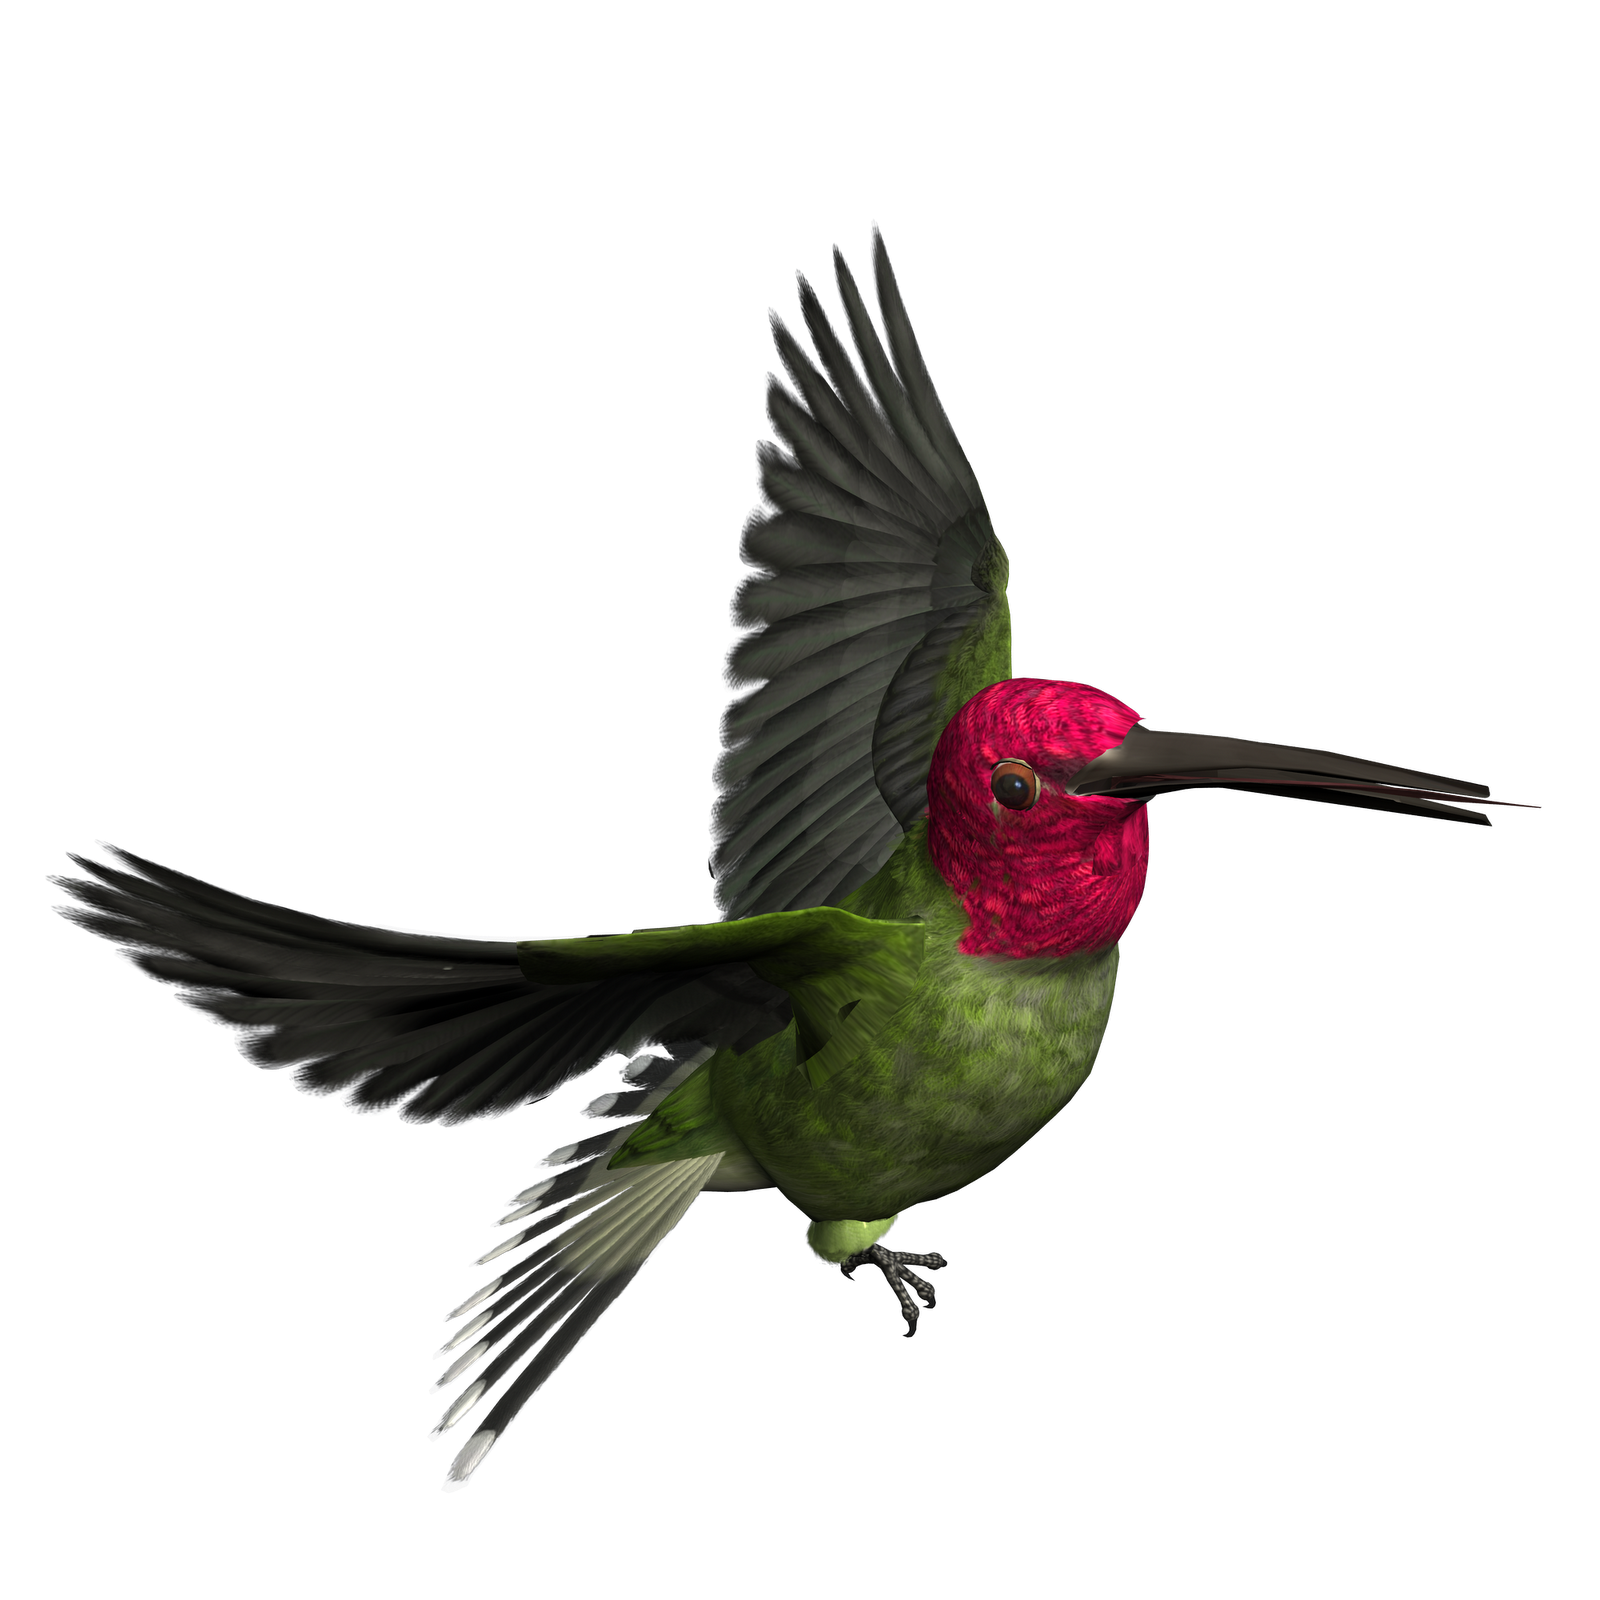 Free Bird Png, Download Free Clip Art, Free Clip Art on.